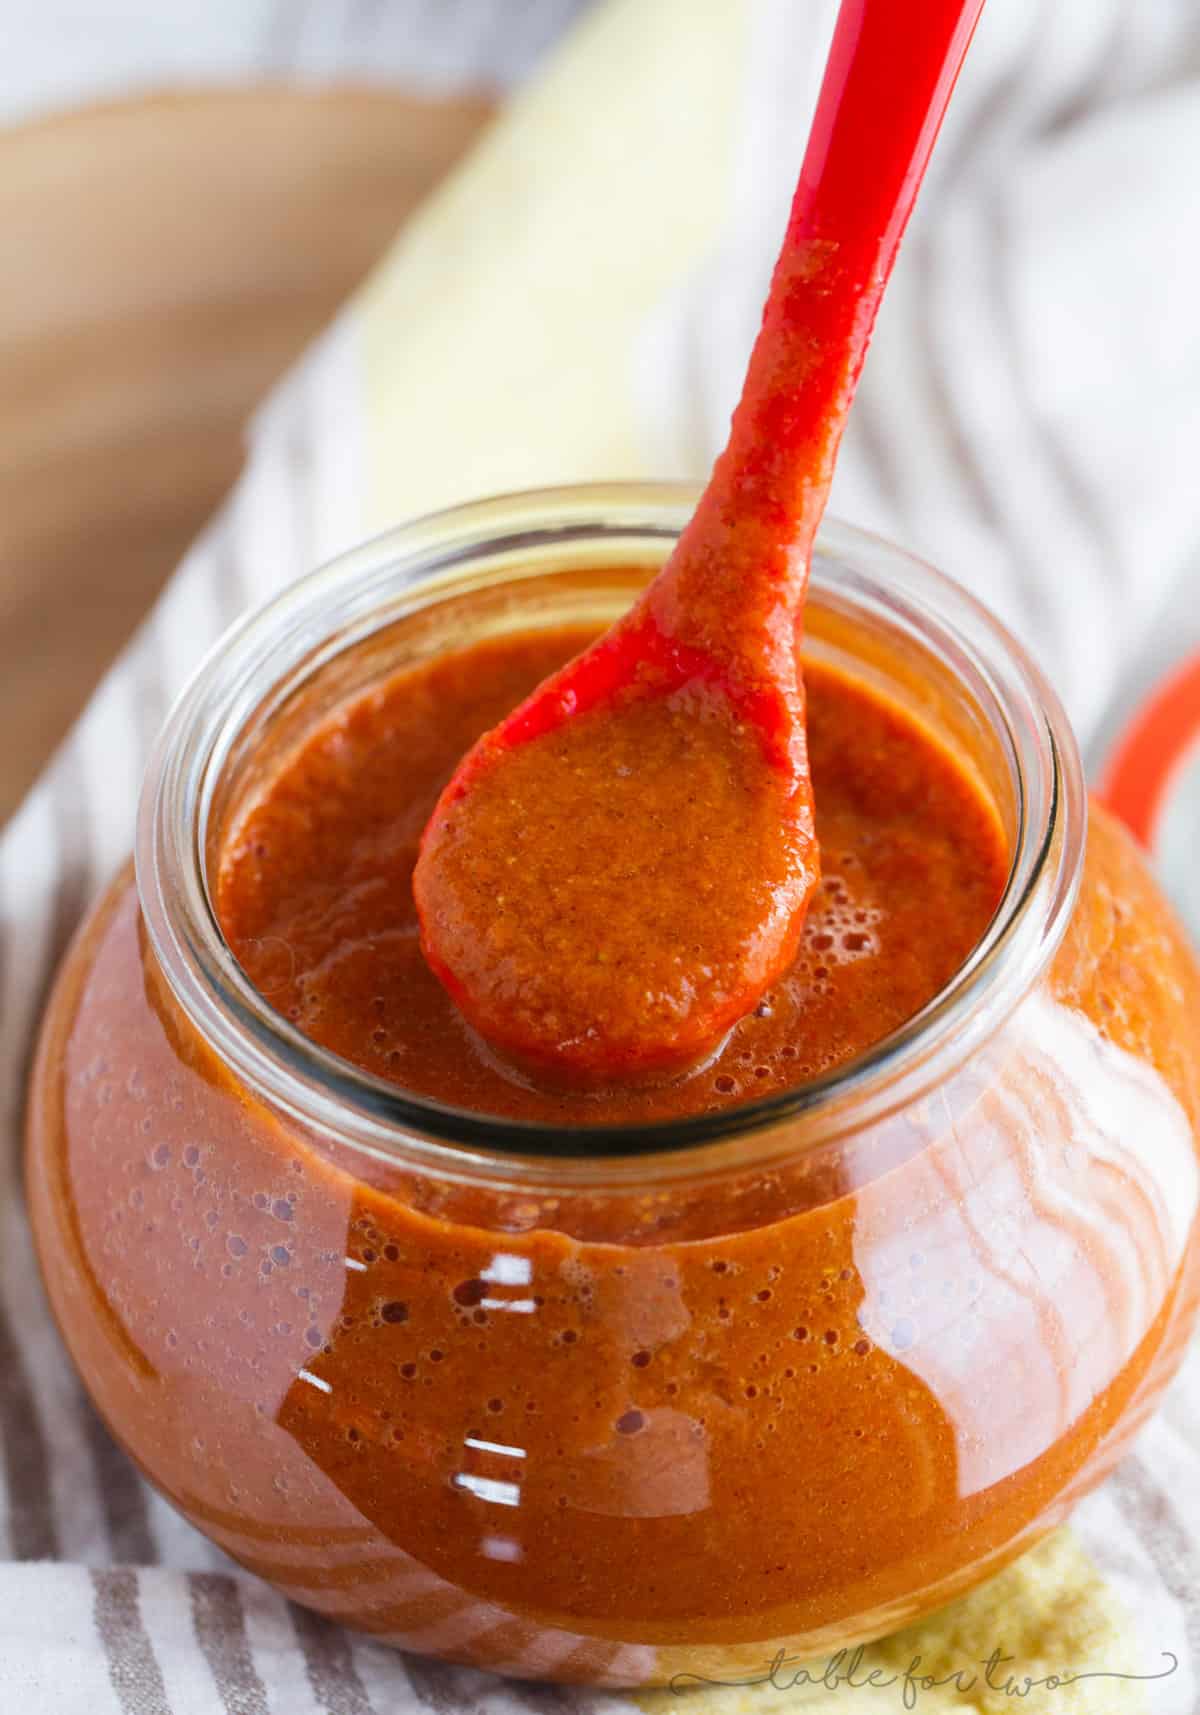 Ditch the store-bought can of enchilada sauce and throw all the ingredients for this easy homemade blender enchilada sauce in your blender for a quick and flavorable enchilada sauce that you can use for so many recipes!